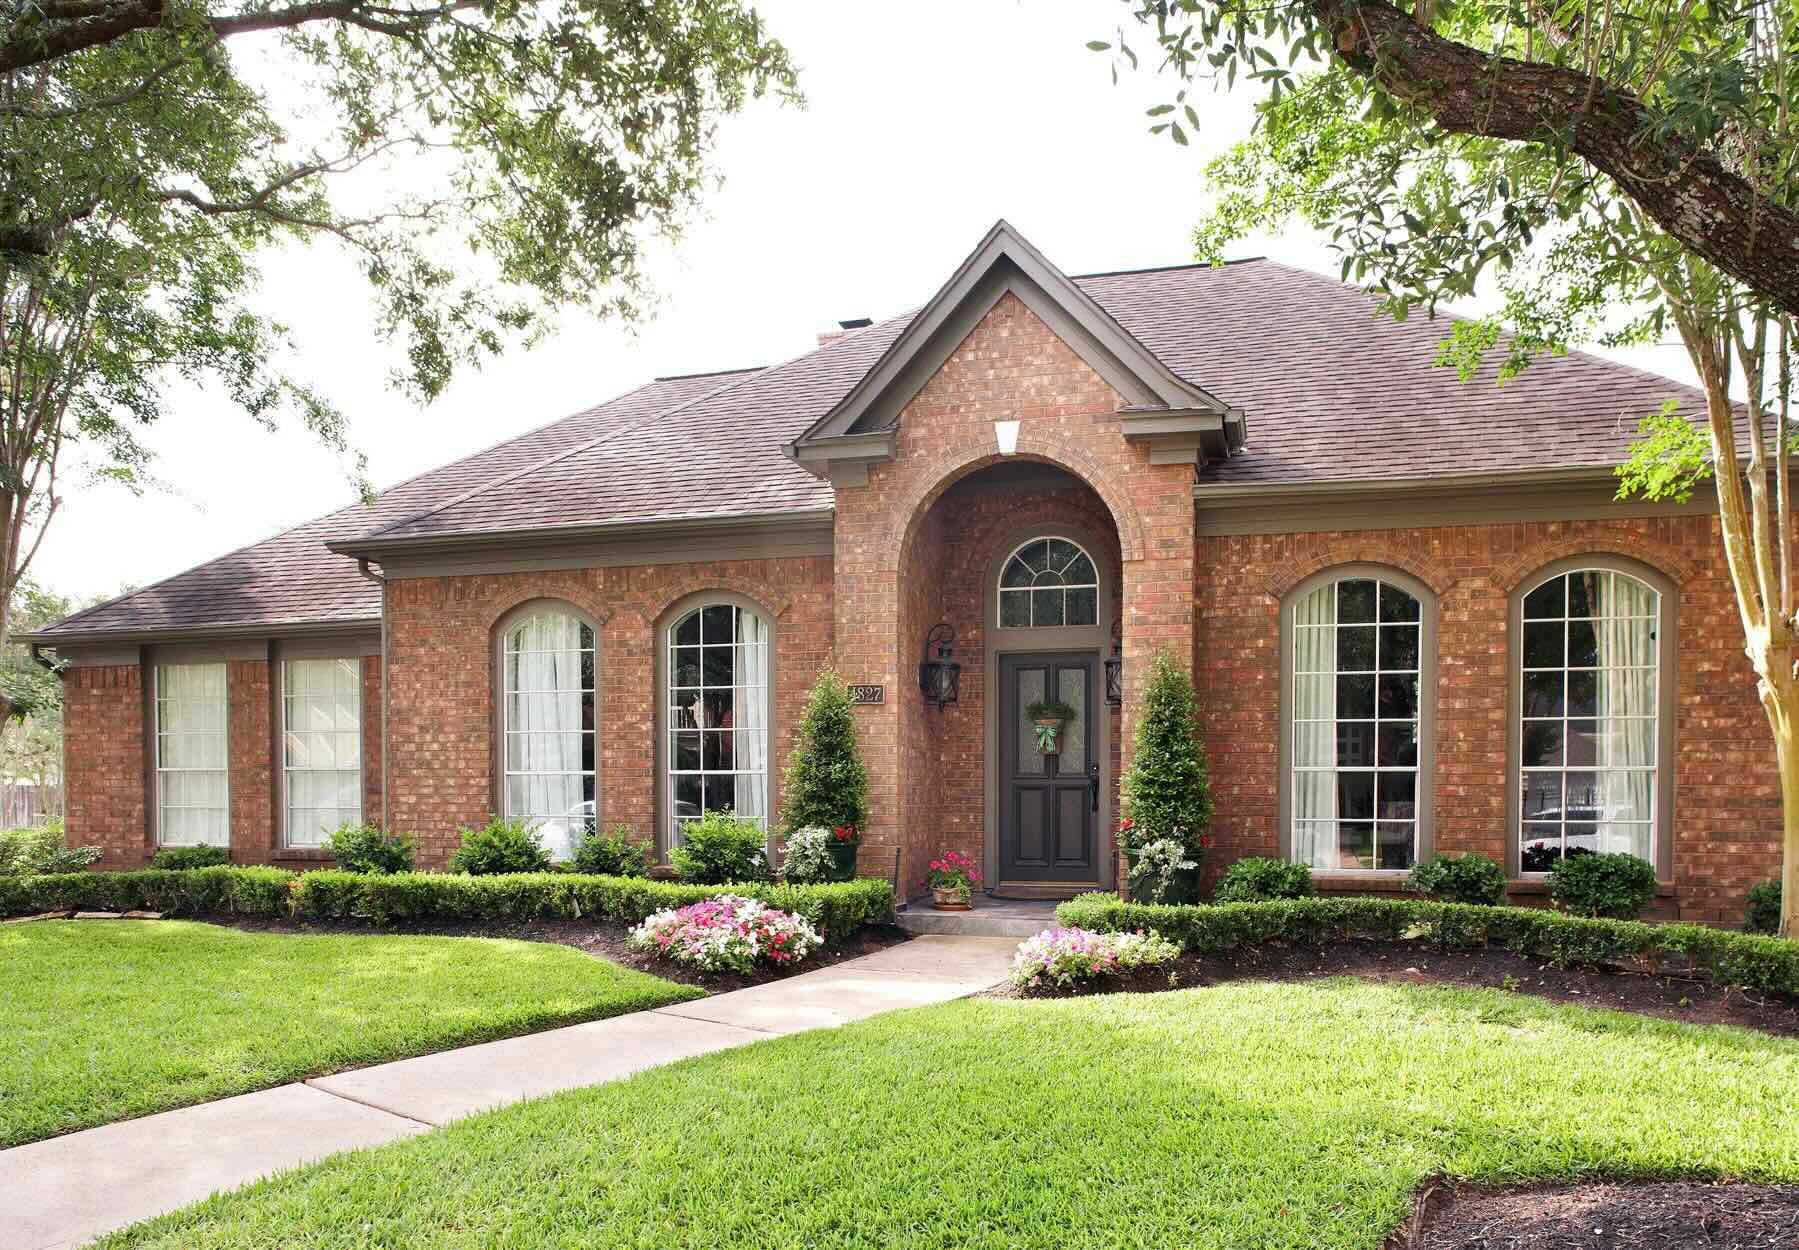 How To Update A Brick Ranch House